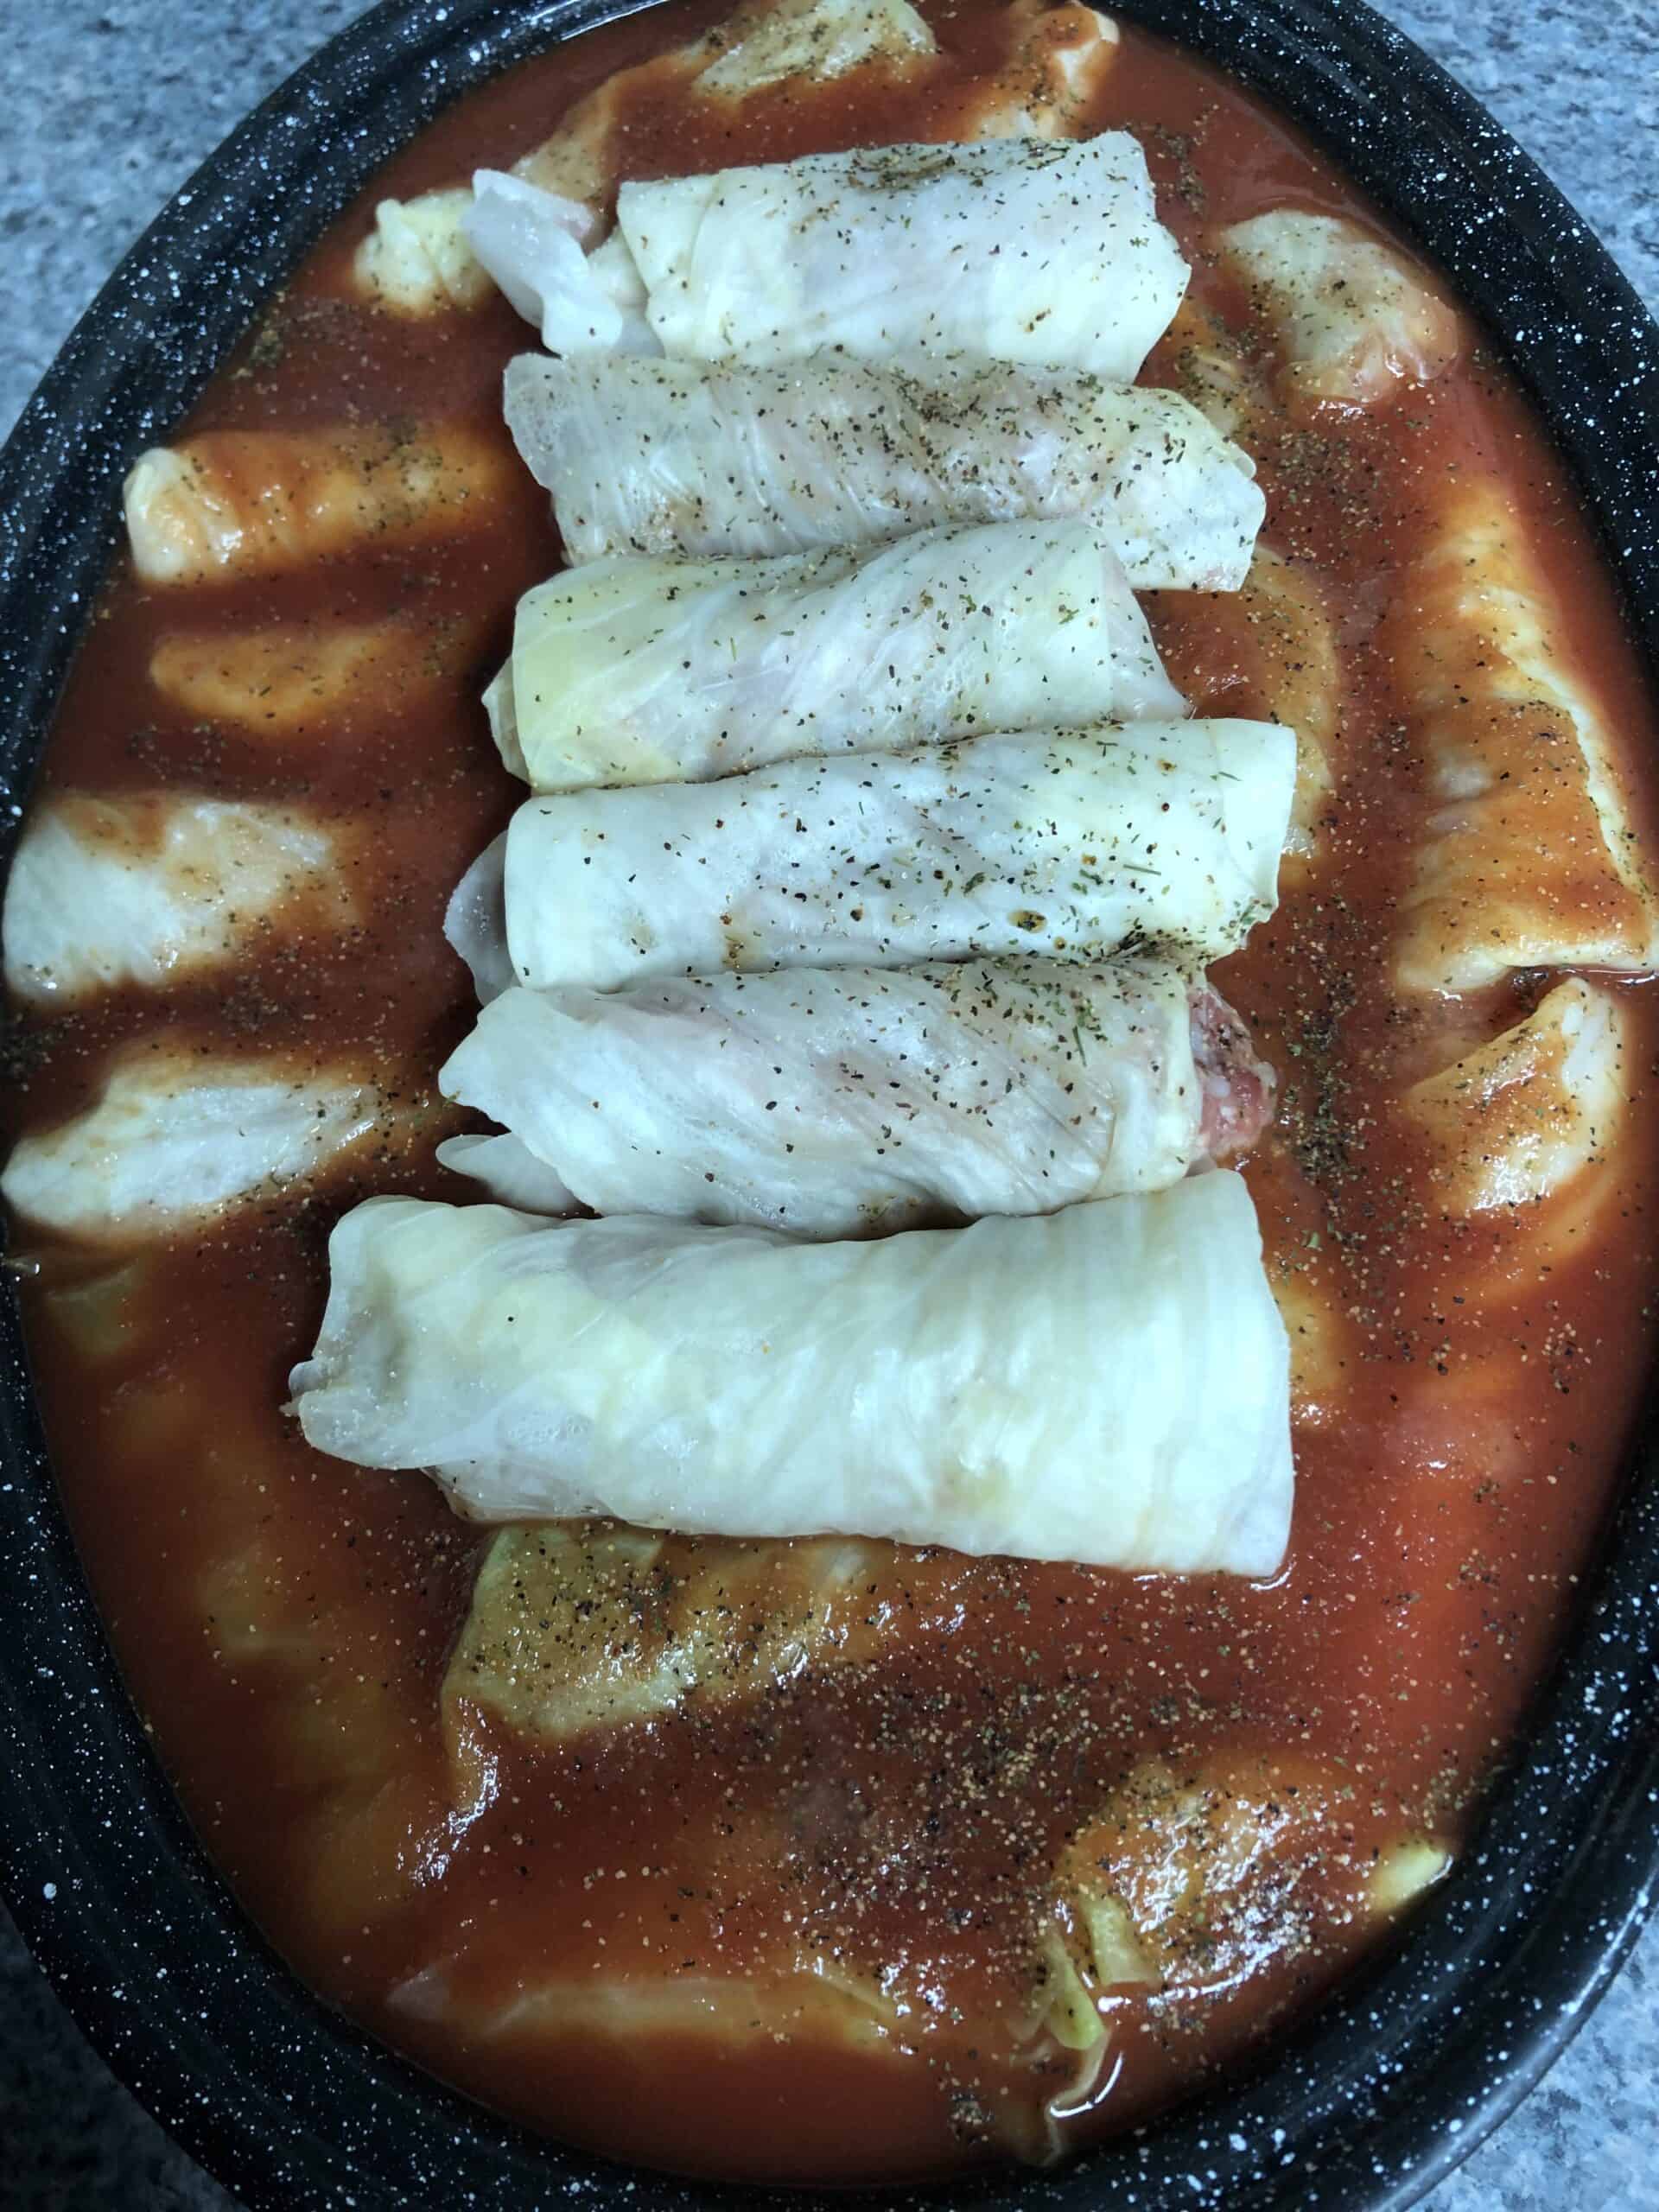 Several cabbage rolls lined up in a roasting pan.